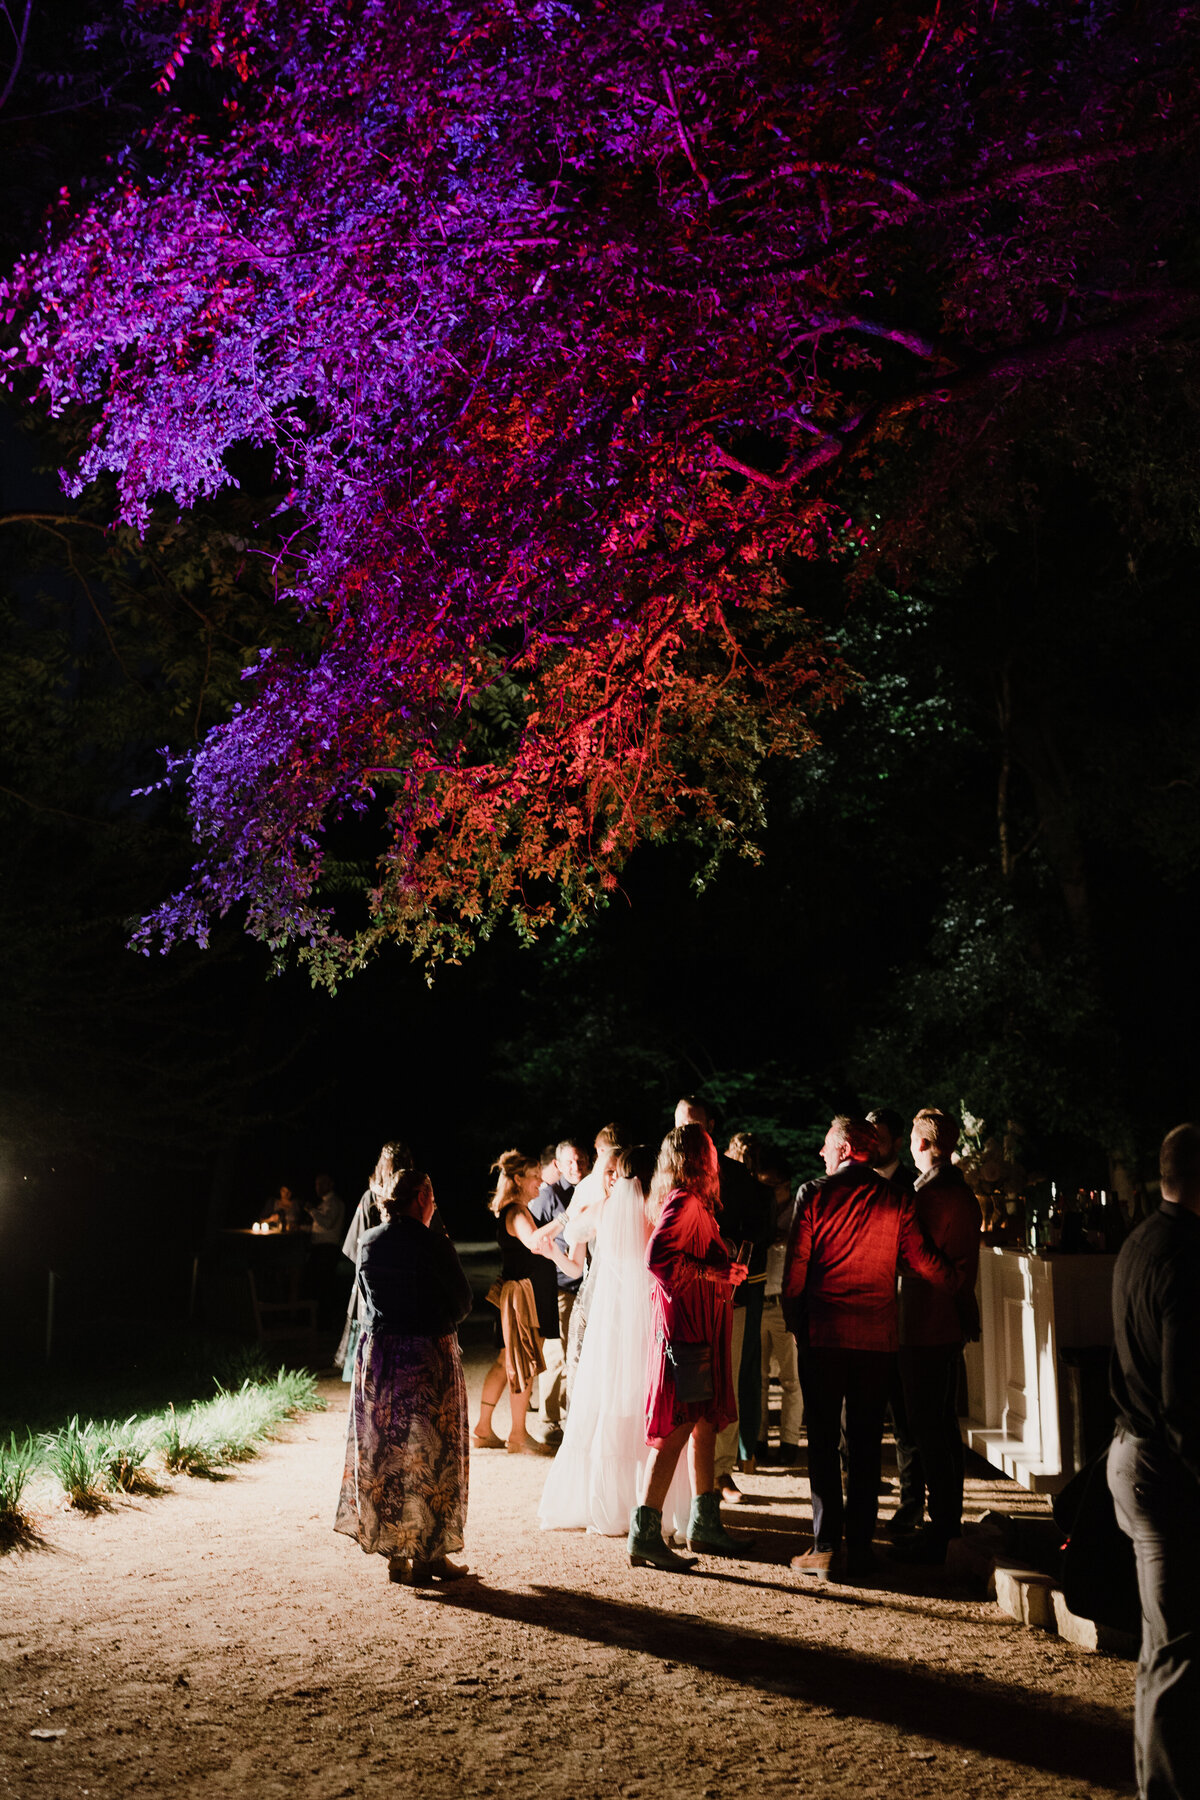 Night time at Umlauf Sculpture Garden, Austin with trees illumated in reds and purple lighting